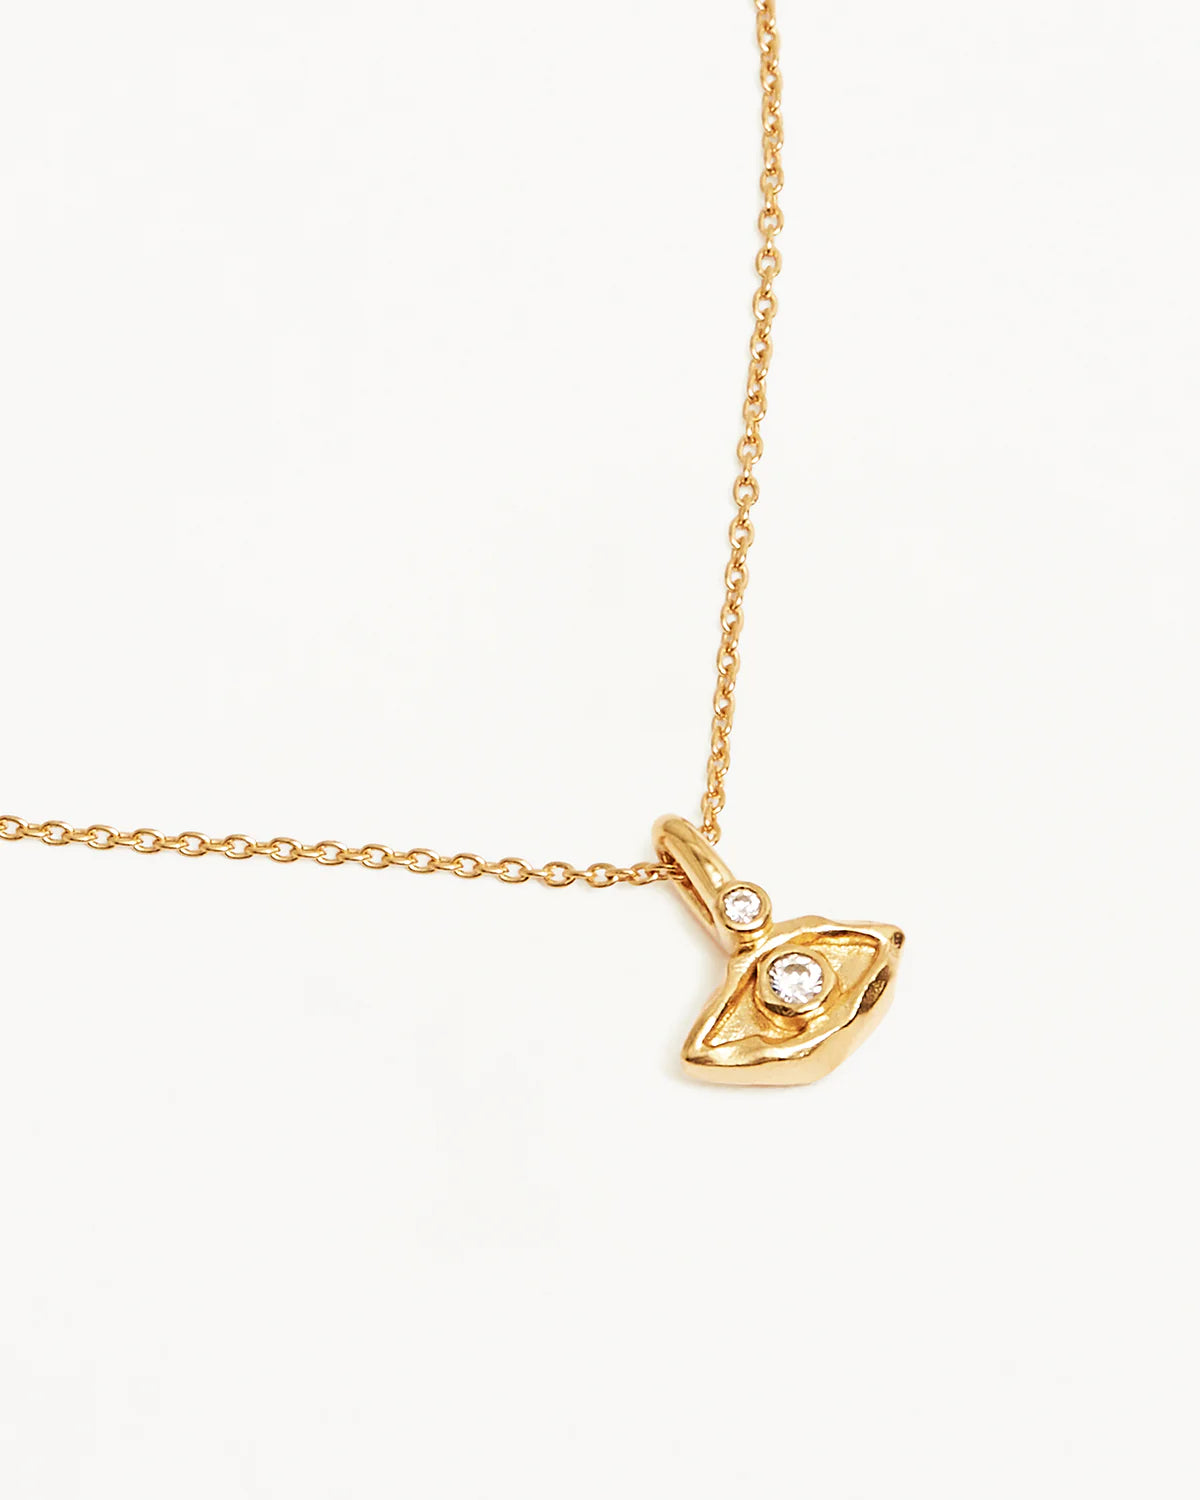 I AM PROTECTED NECKLACE -18K GOLD VERMEIL - BY CHARLOTTE